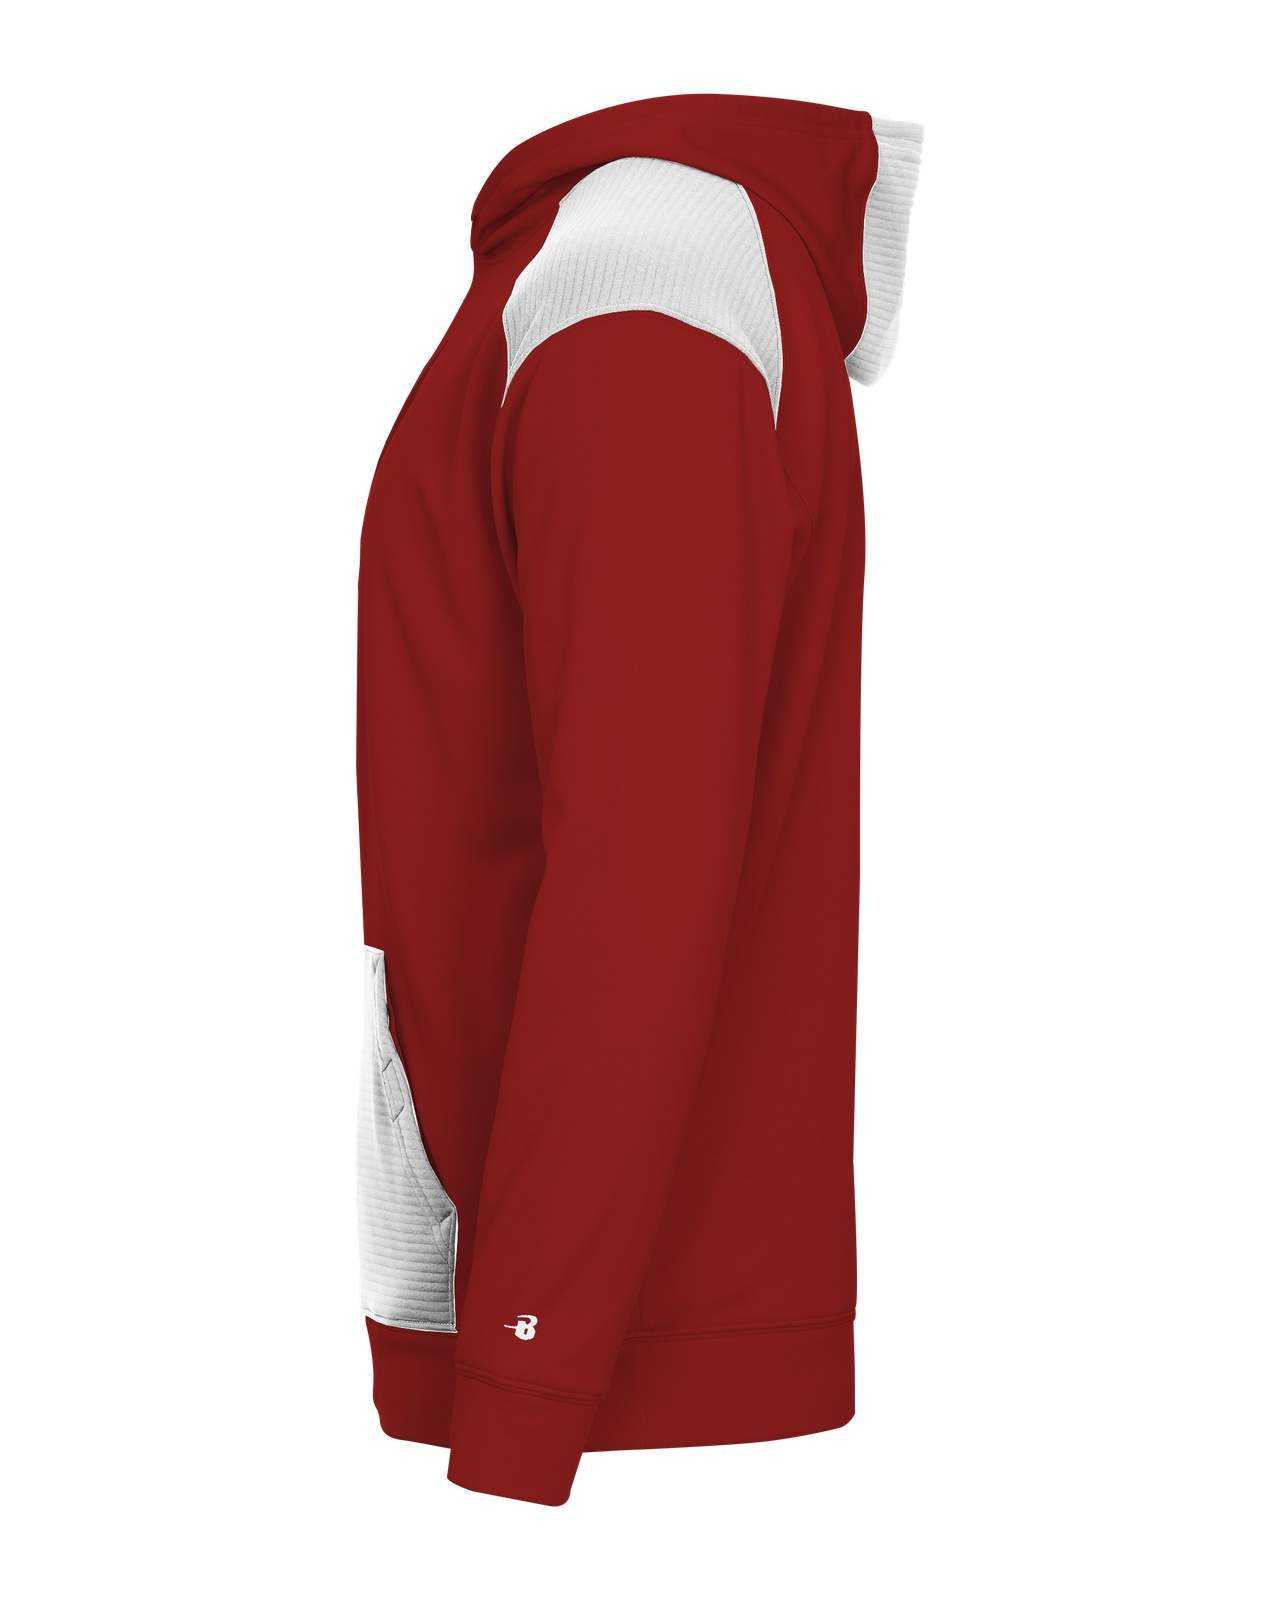 Badger Sport 1440 Breakout Performance Fleece Hoodie - Red White - HIT a Double - 1